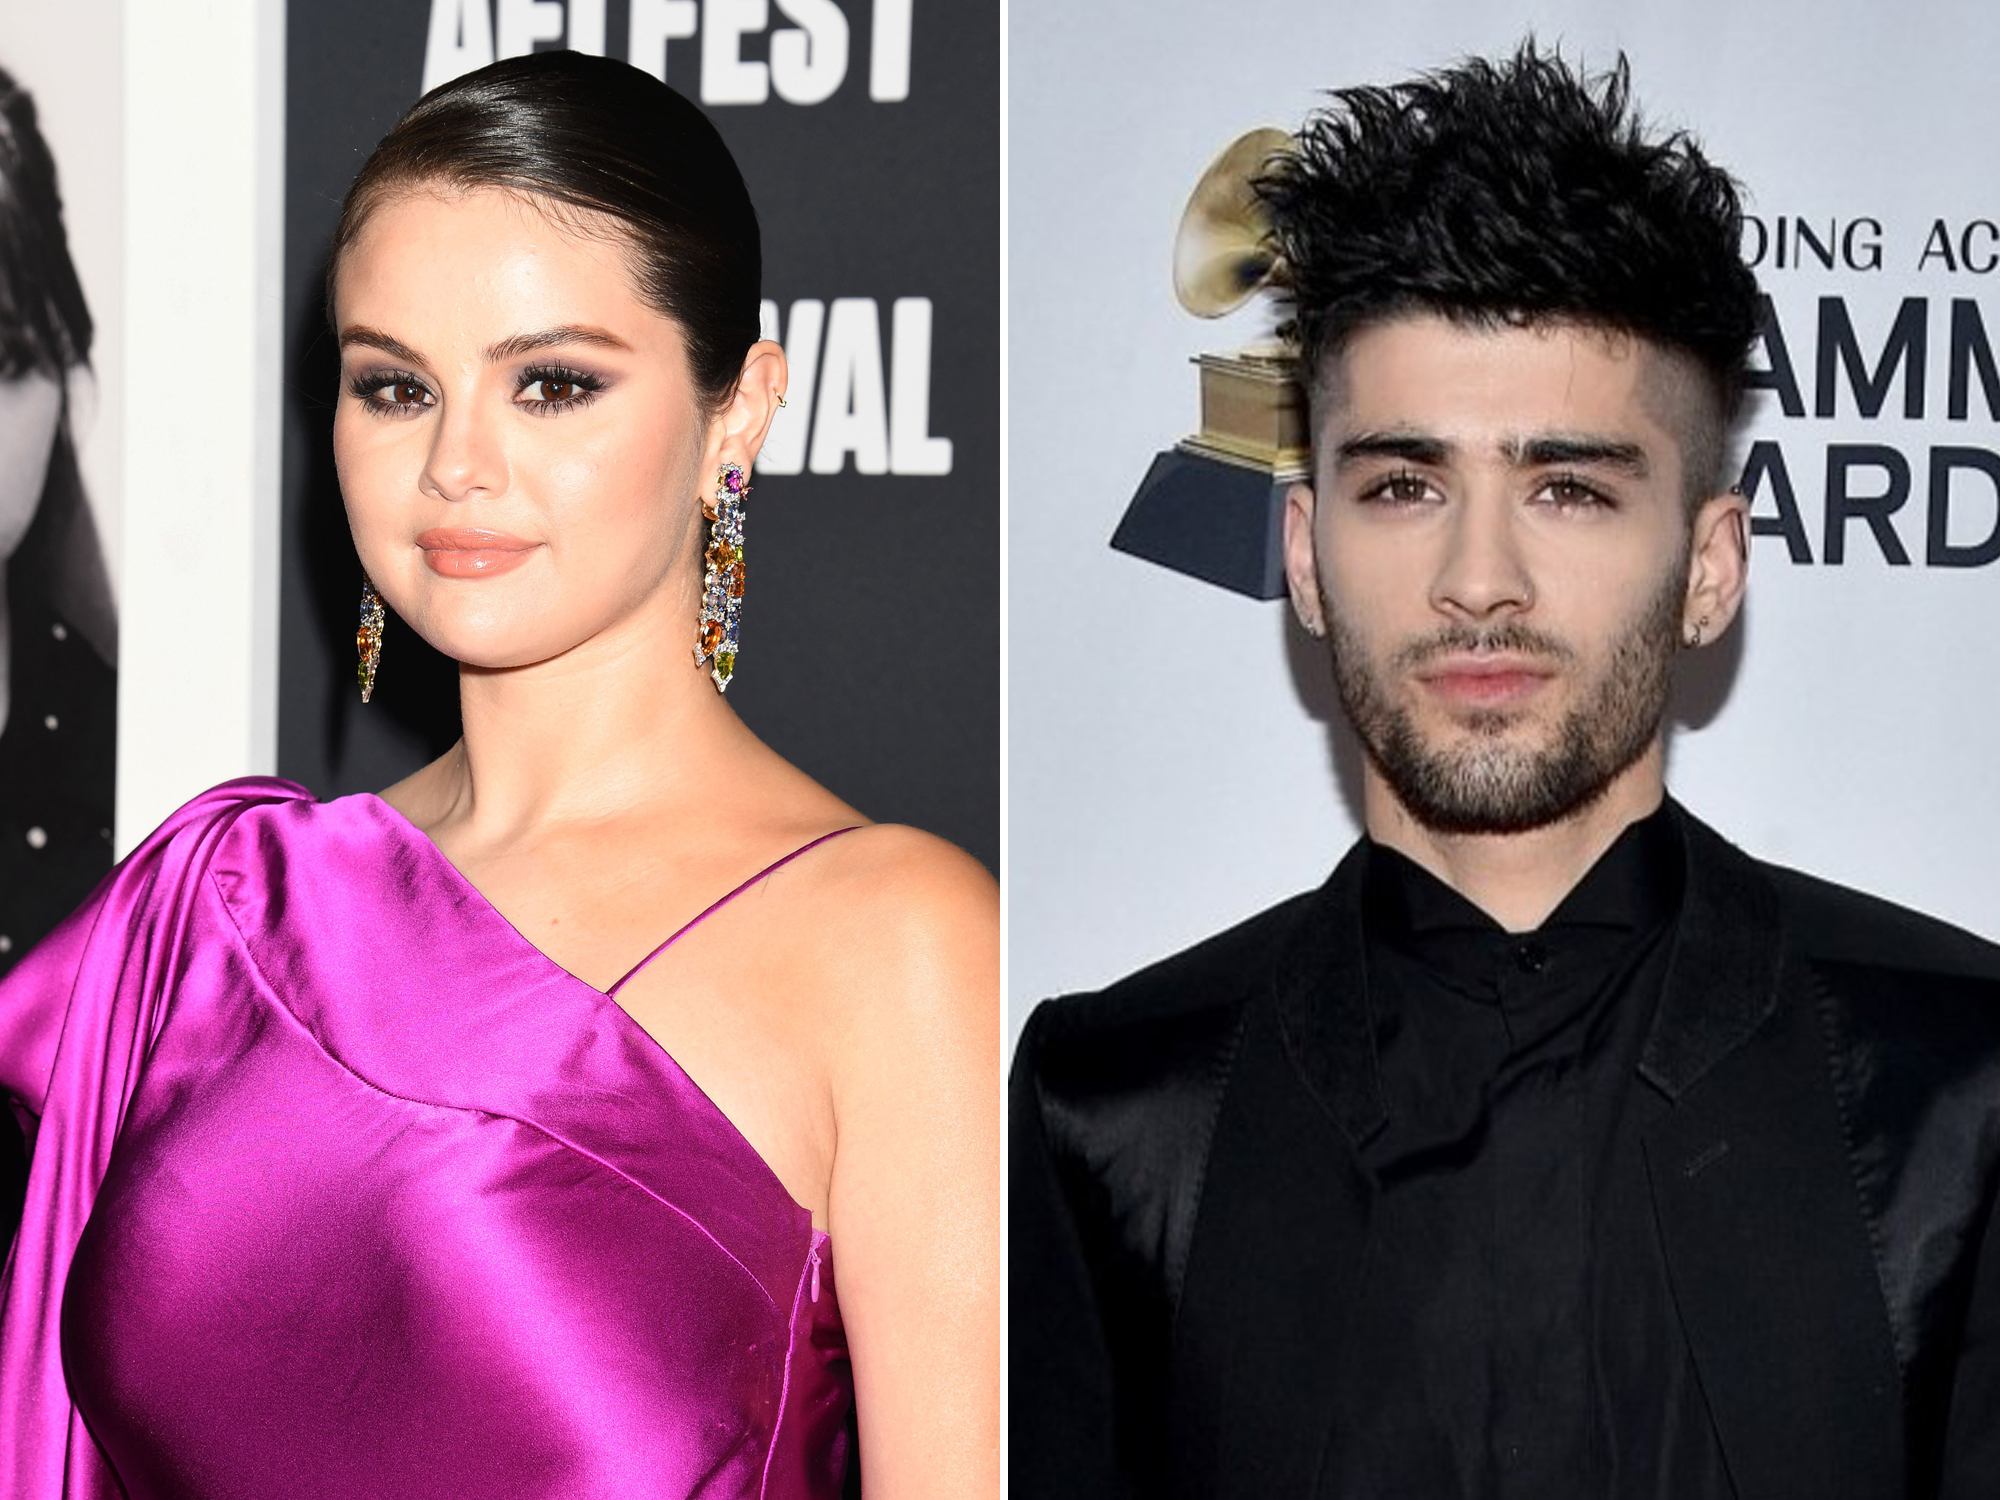 2023 continues to be chaotic as Selena Gomez and Zayn Malik are ...